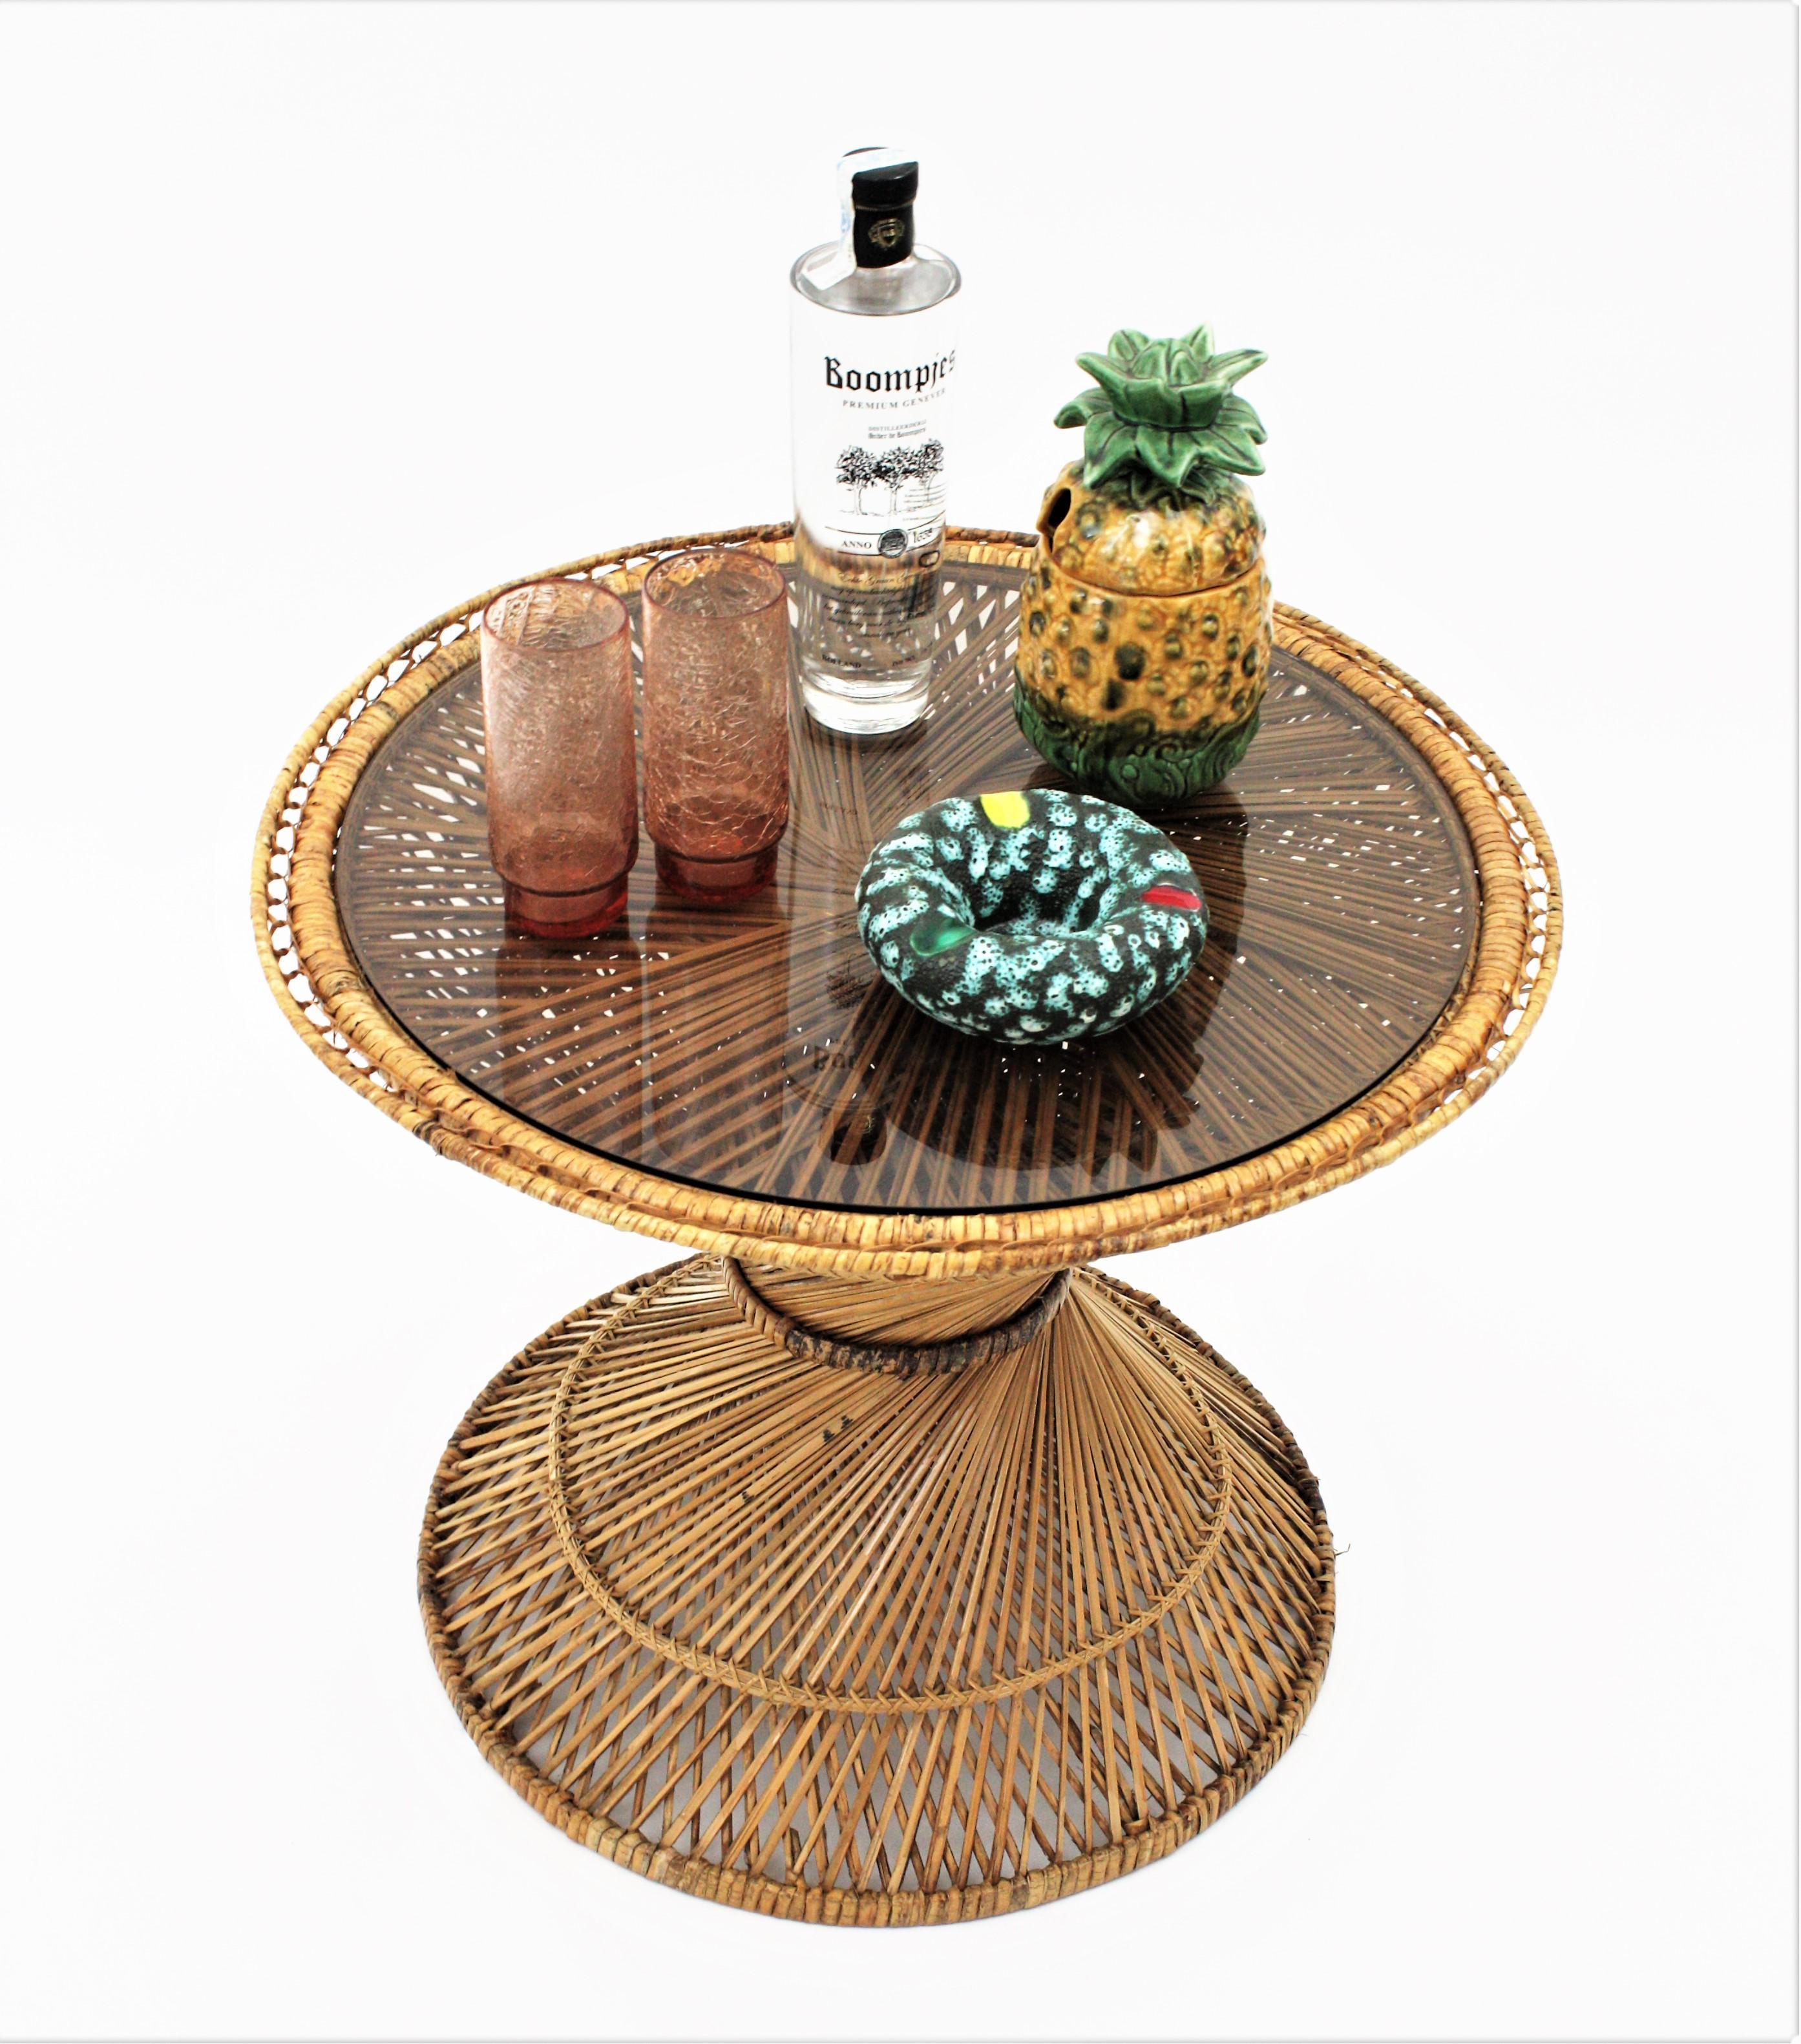 Woven Wicker and Rattan Emmanuelle Peacock Coffee Table, Spain, 1960s For Sale 3